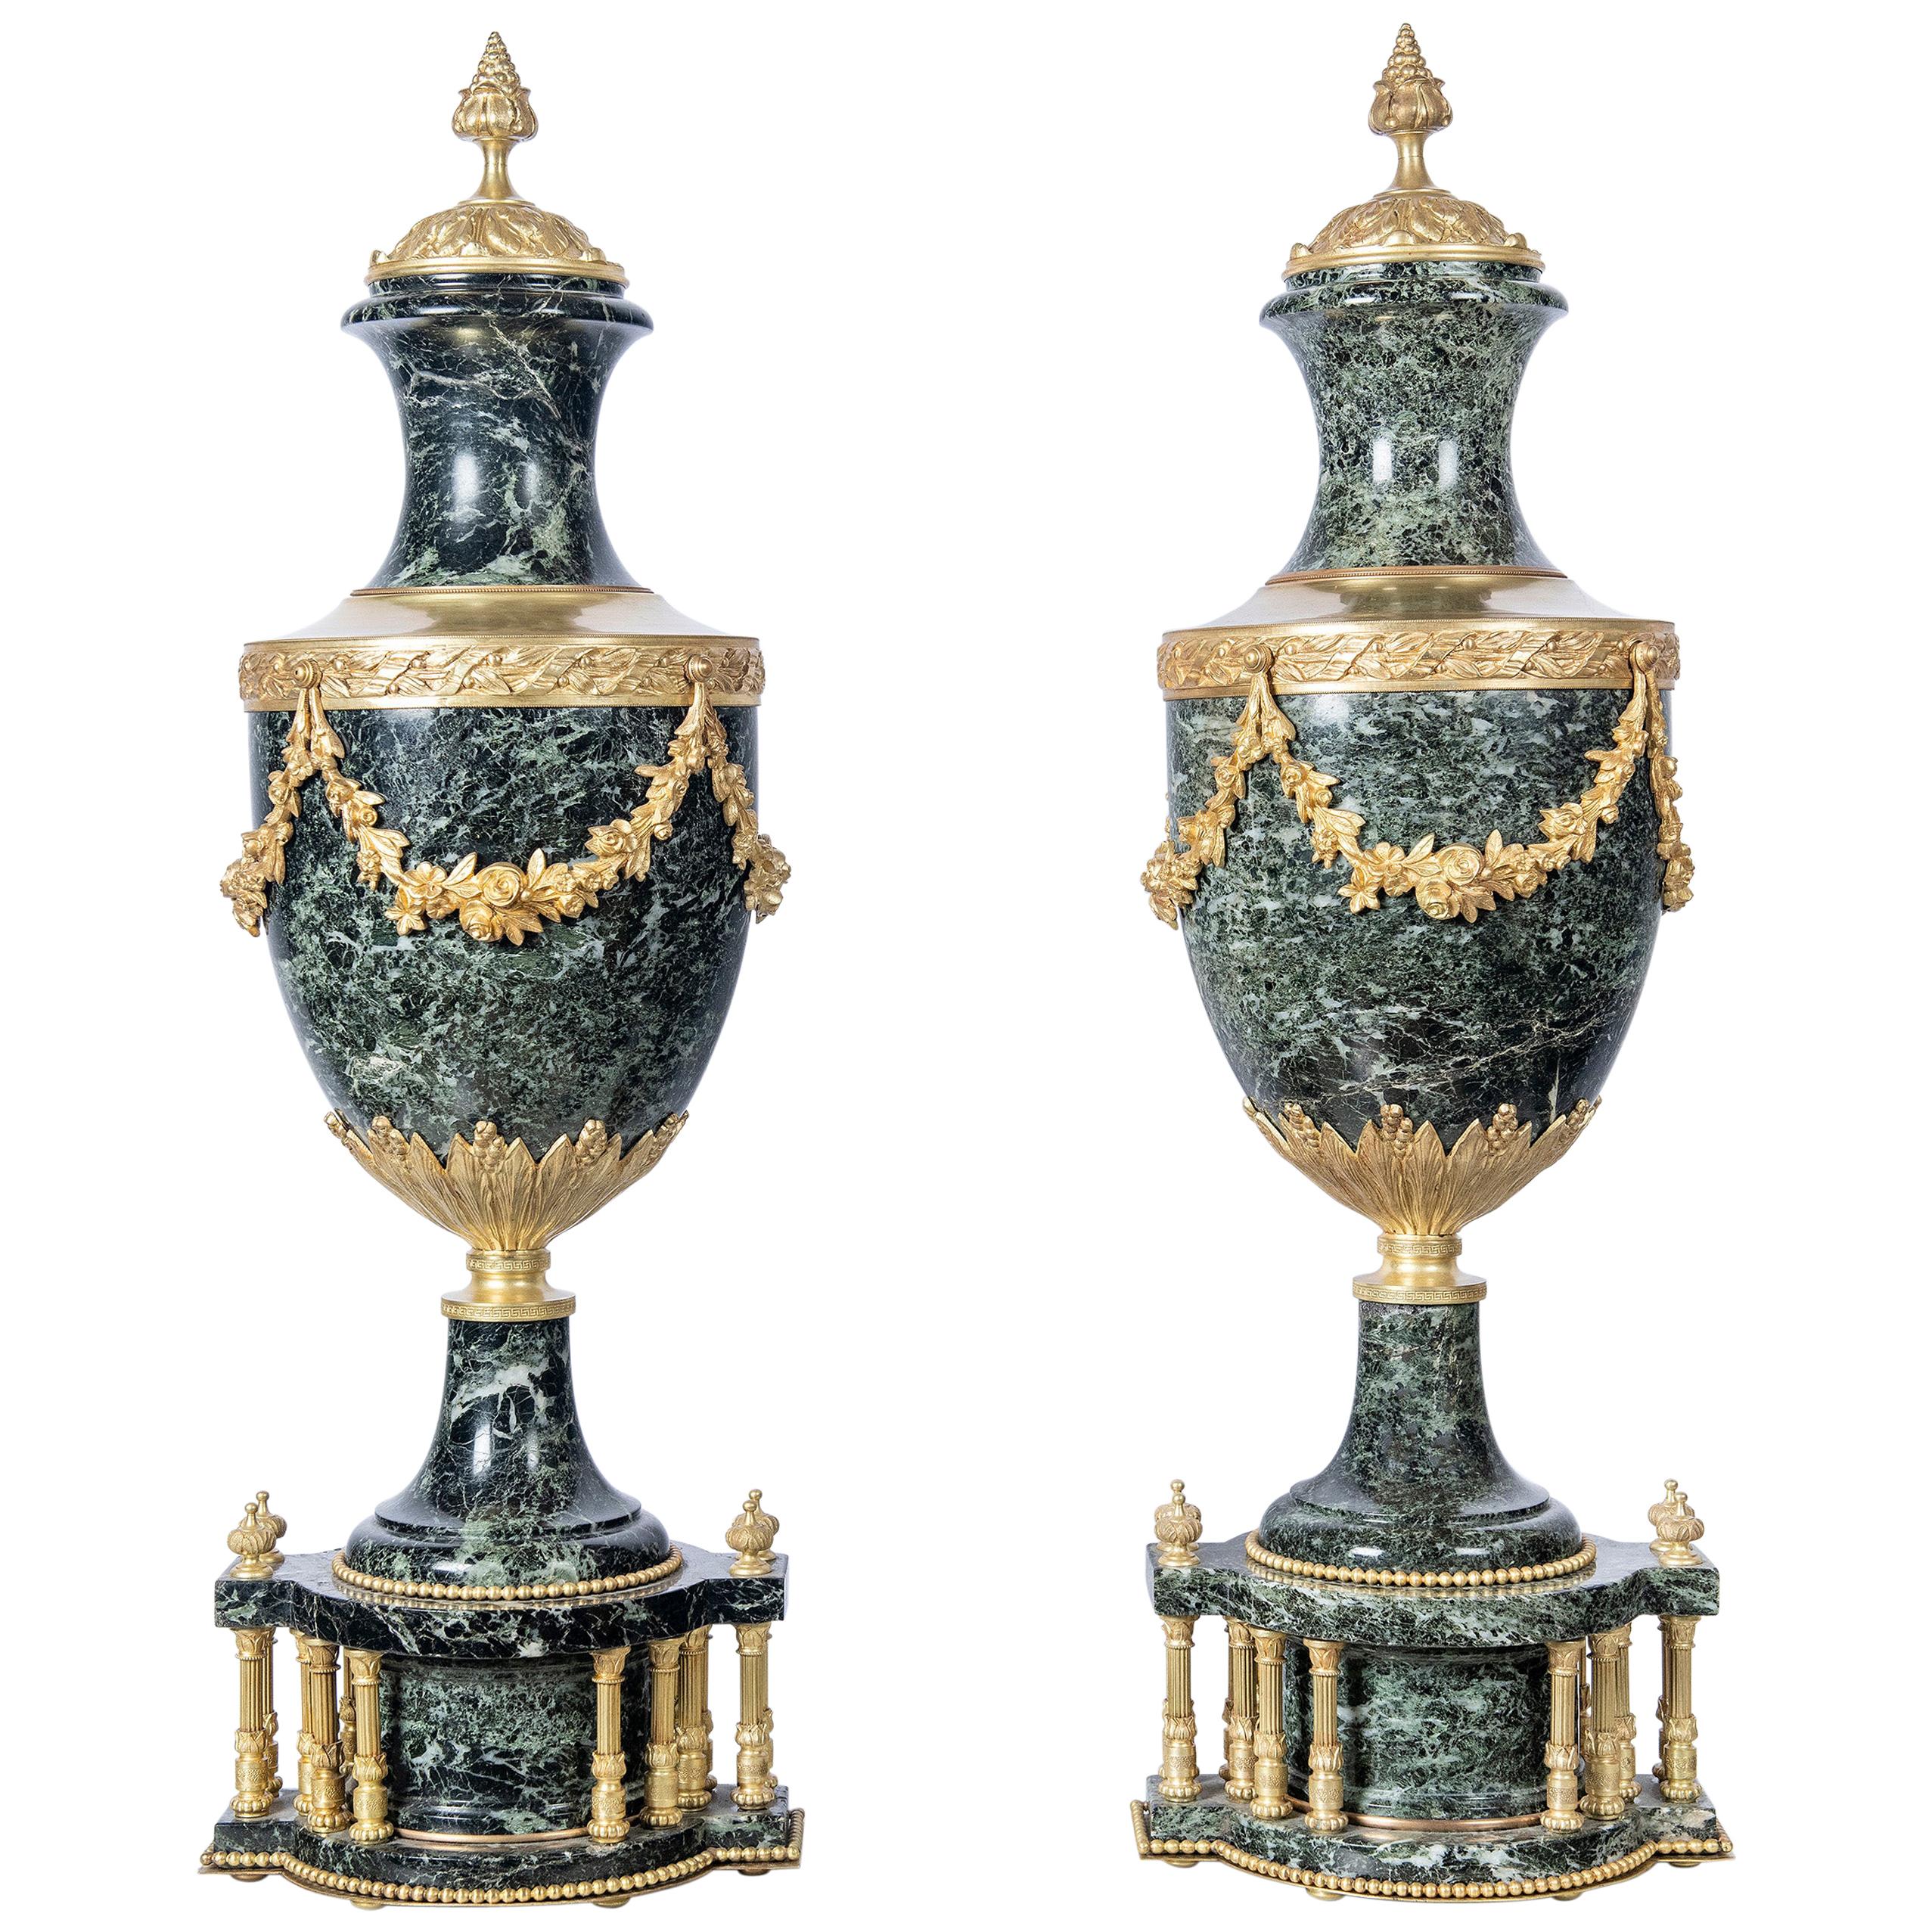 Pair of Marble and Gilt Bronze Cassolettes, France, Late 19th Century